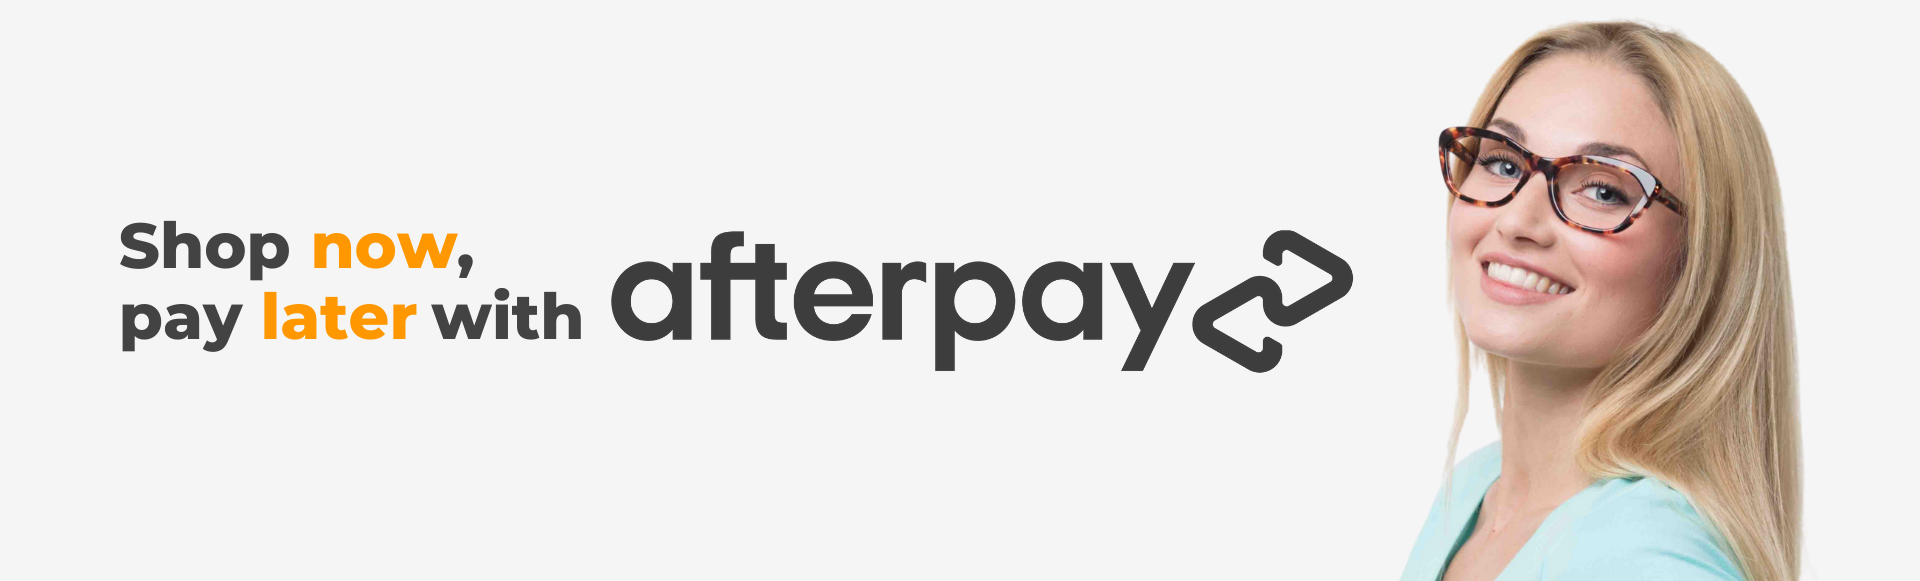 Afterpay Payments